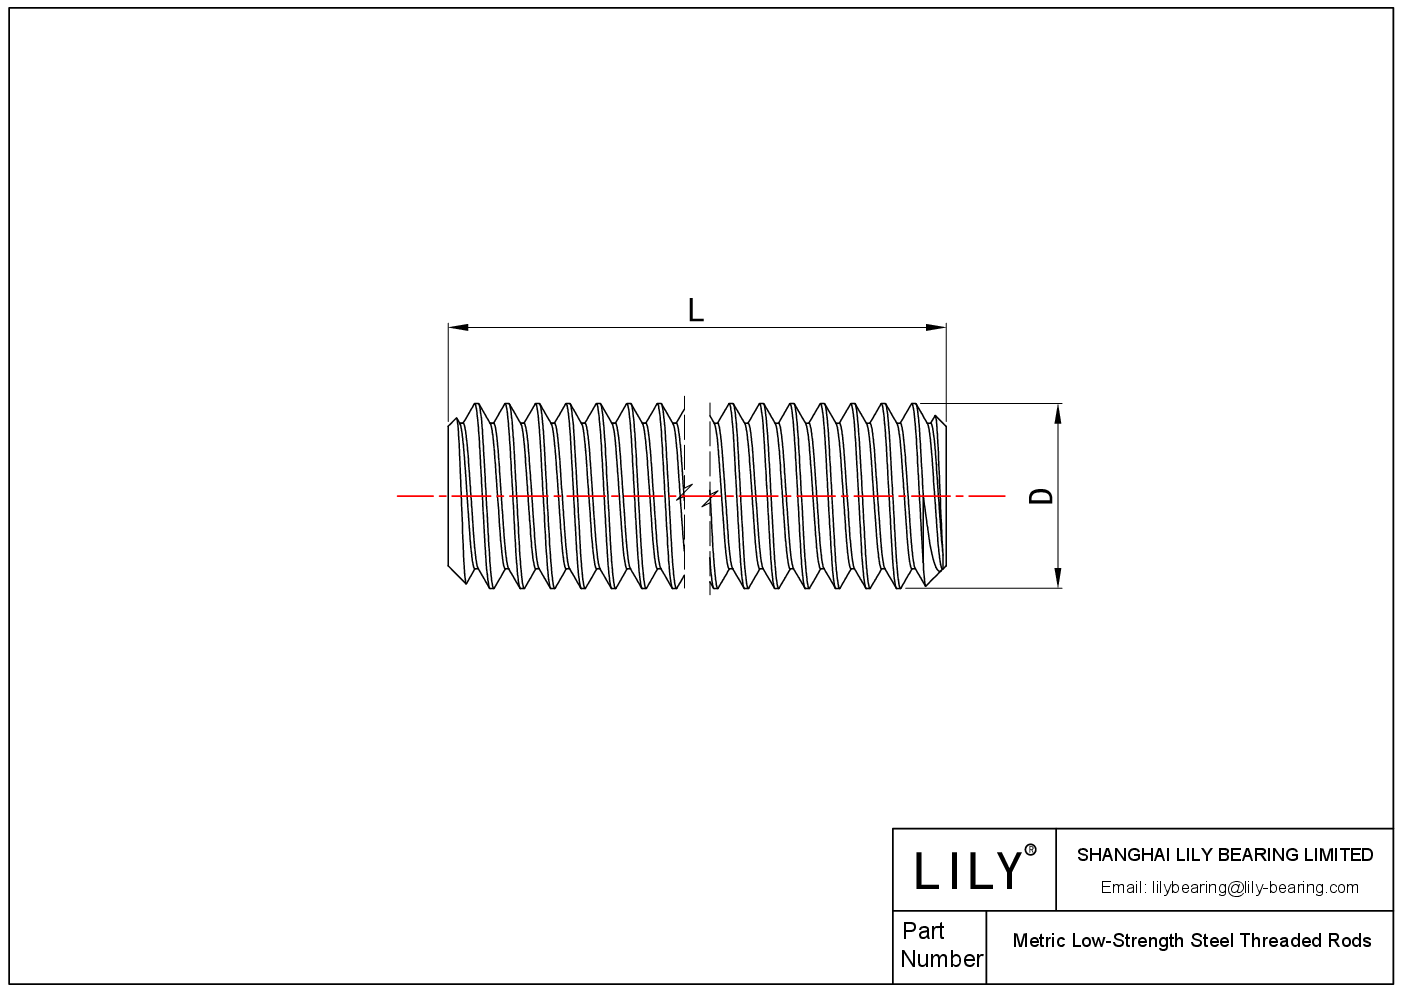 JEFJFACDH Metric Low-Strength Steel Threaded Rods cad drawing